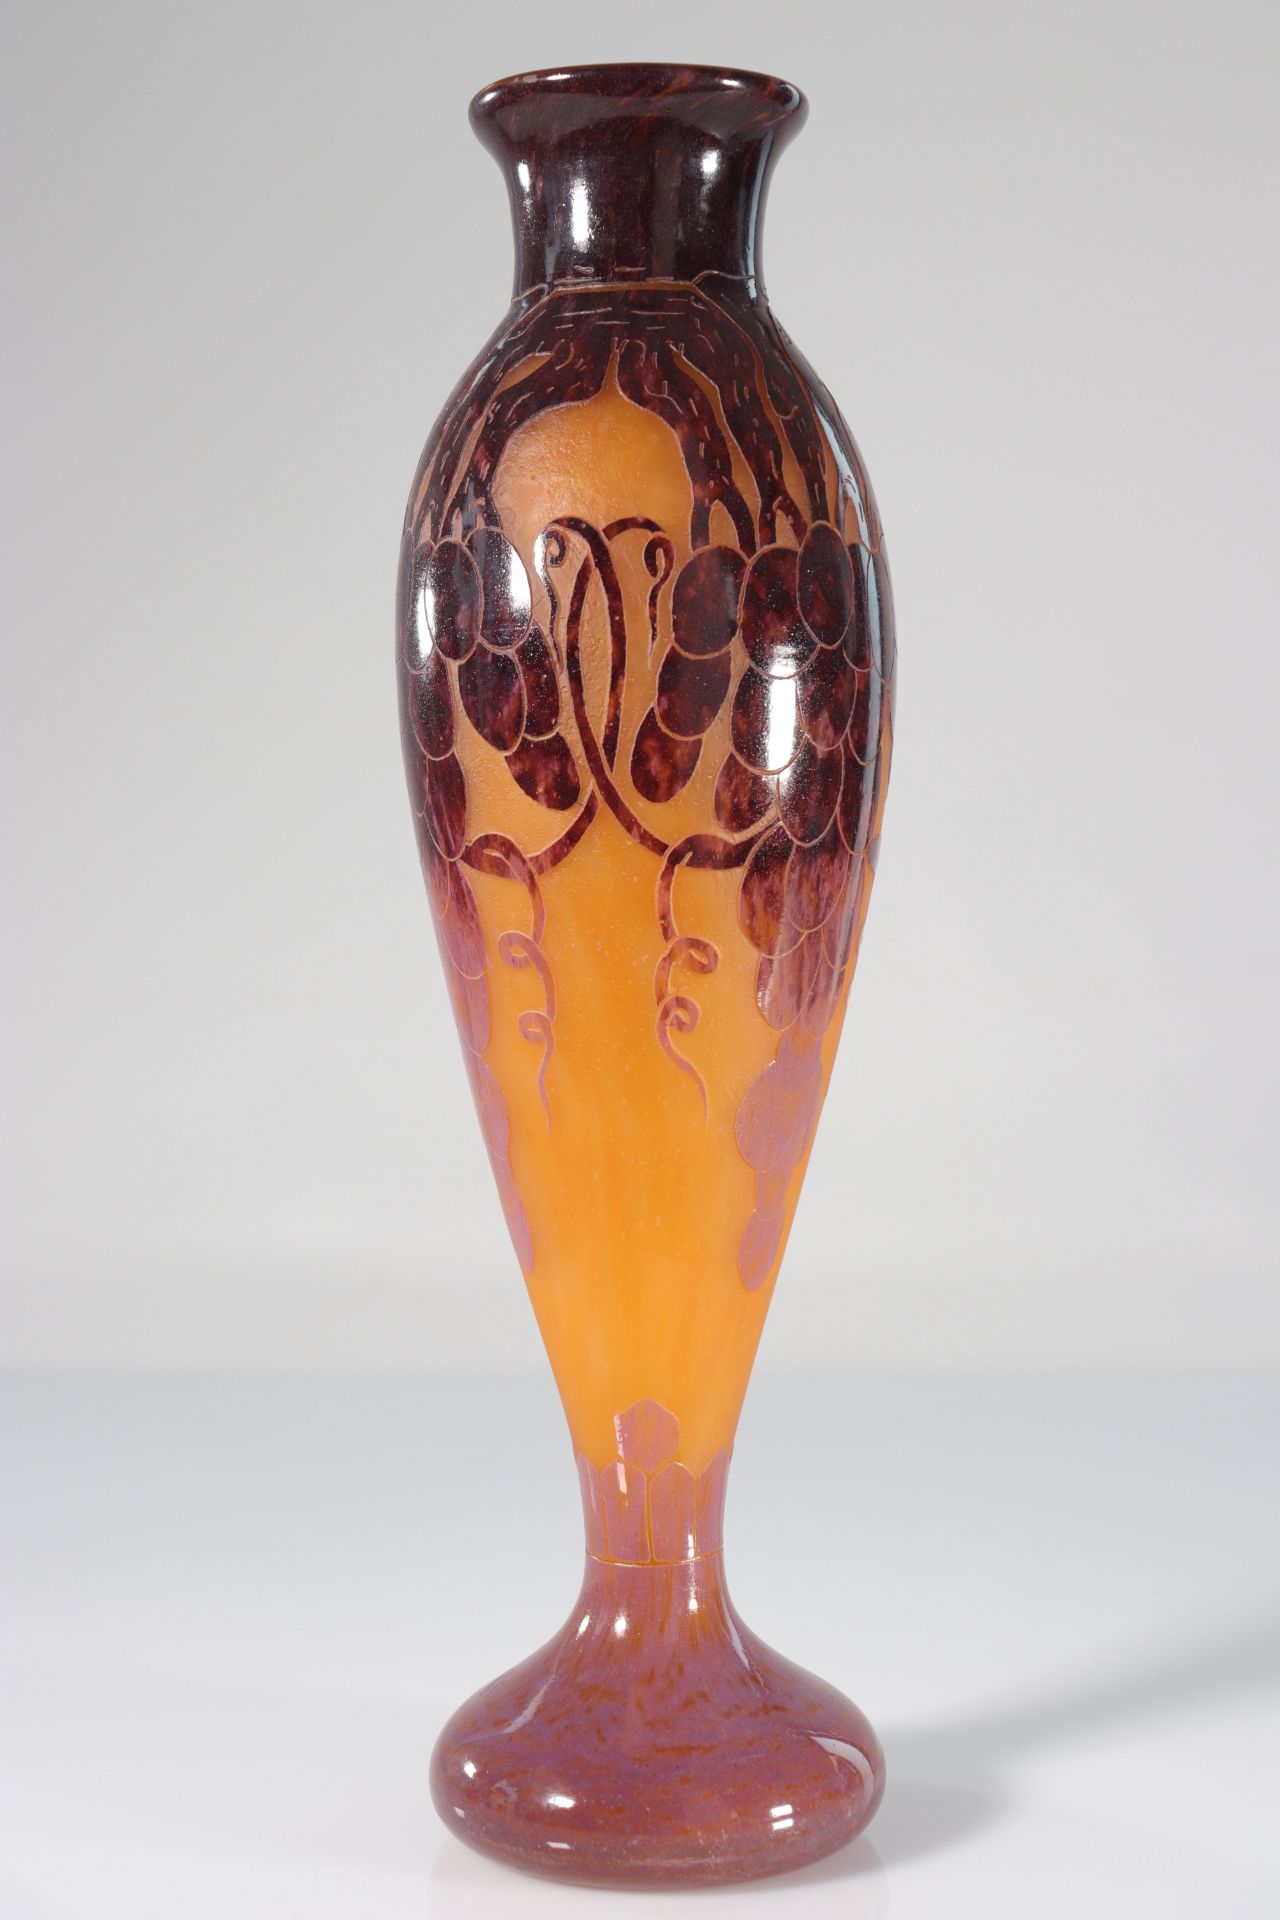 The imposing French glass vase with grape decoration